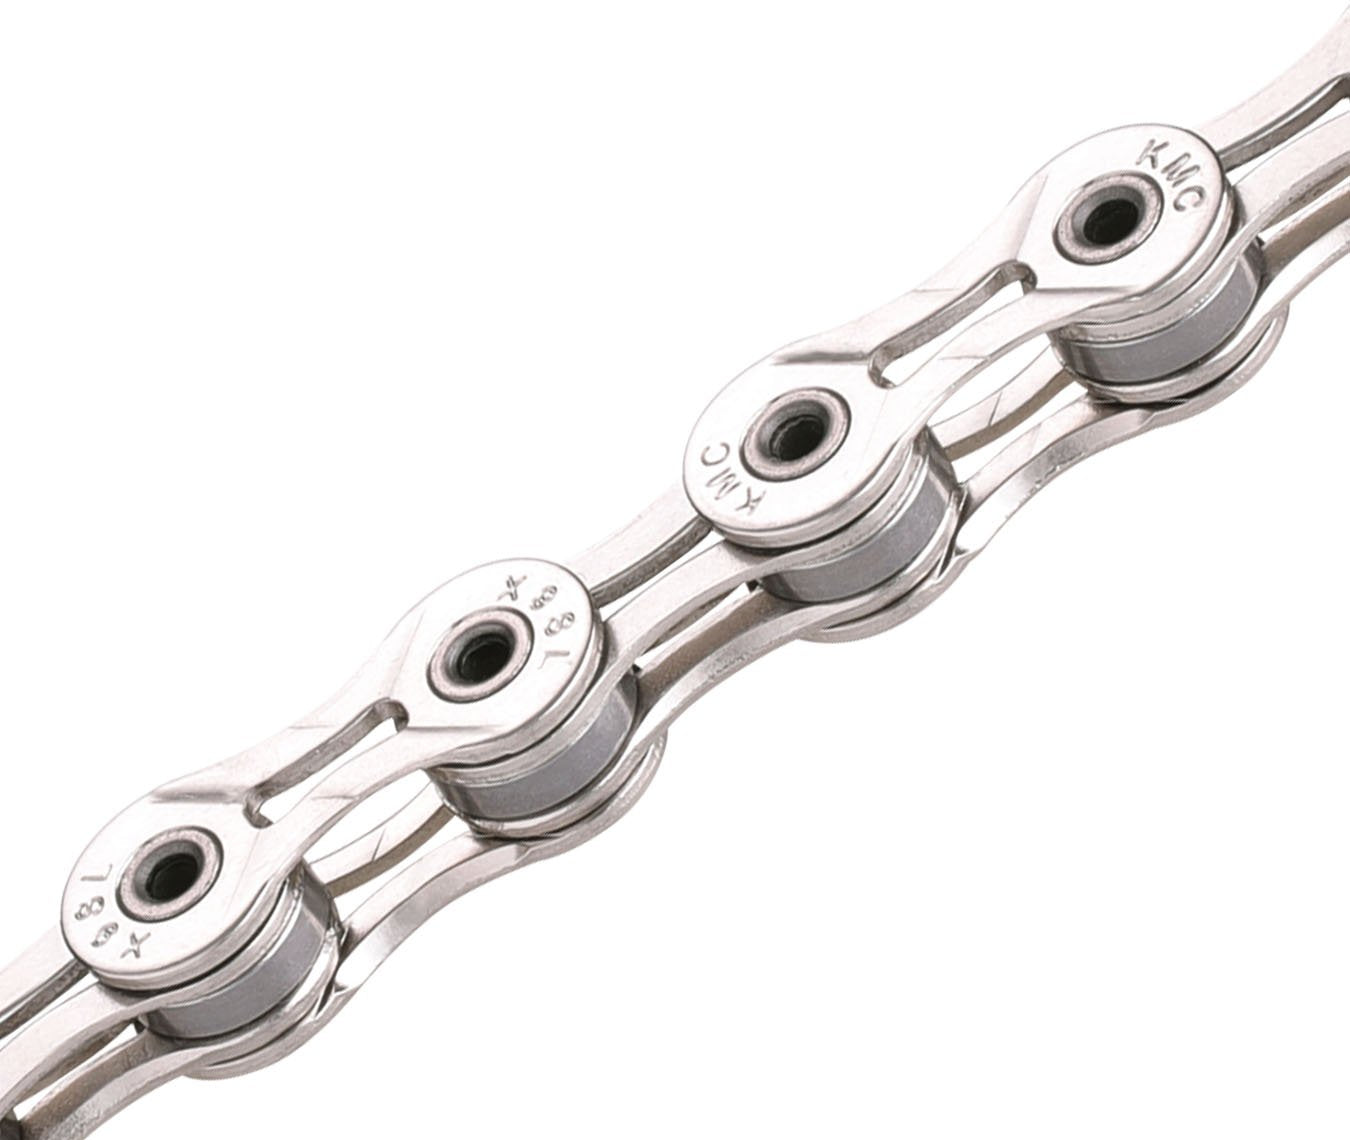 KMC X9SL-08 116 Links Bicycle Chain - Silver/Silver - Cyclop.in